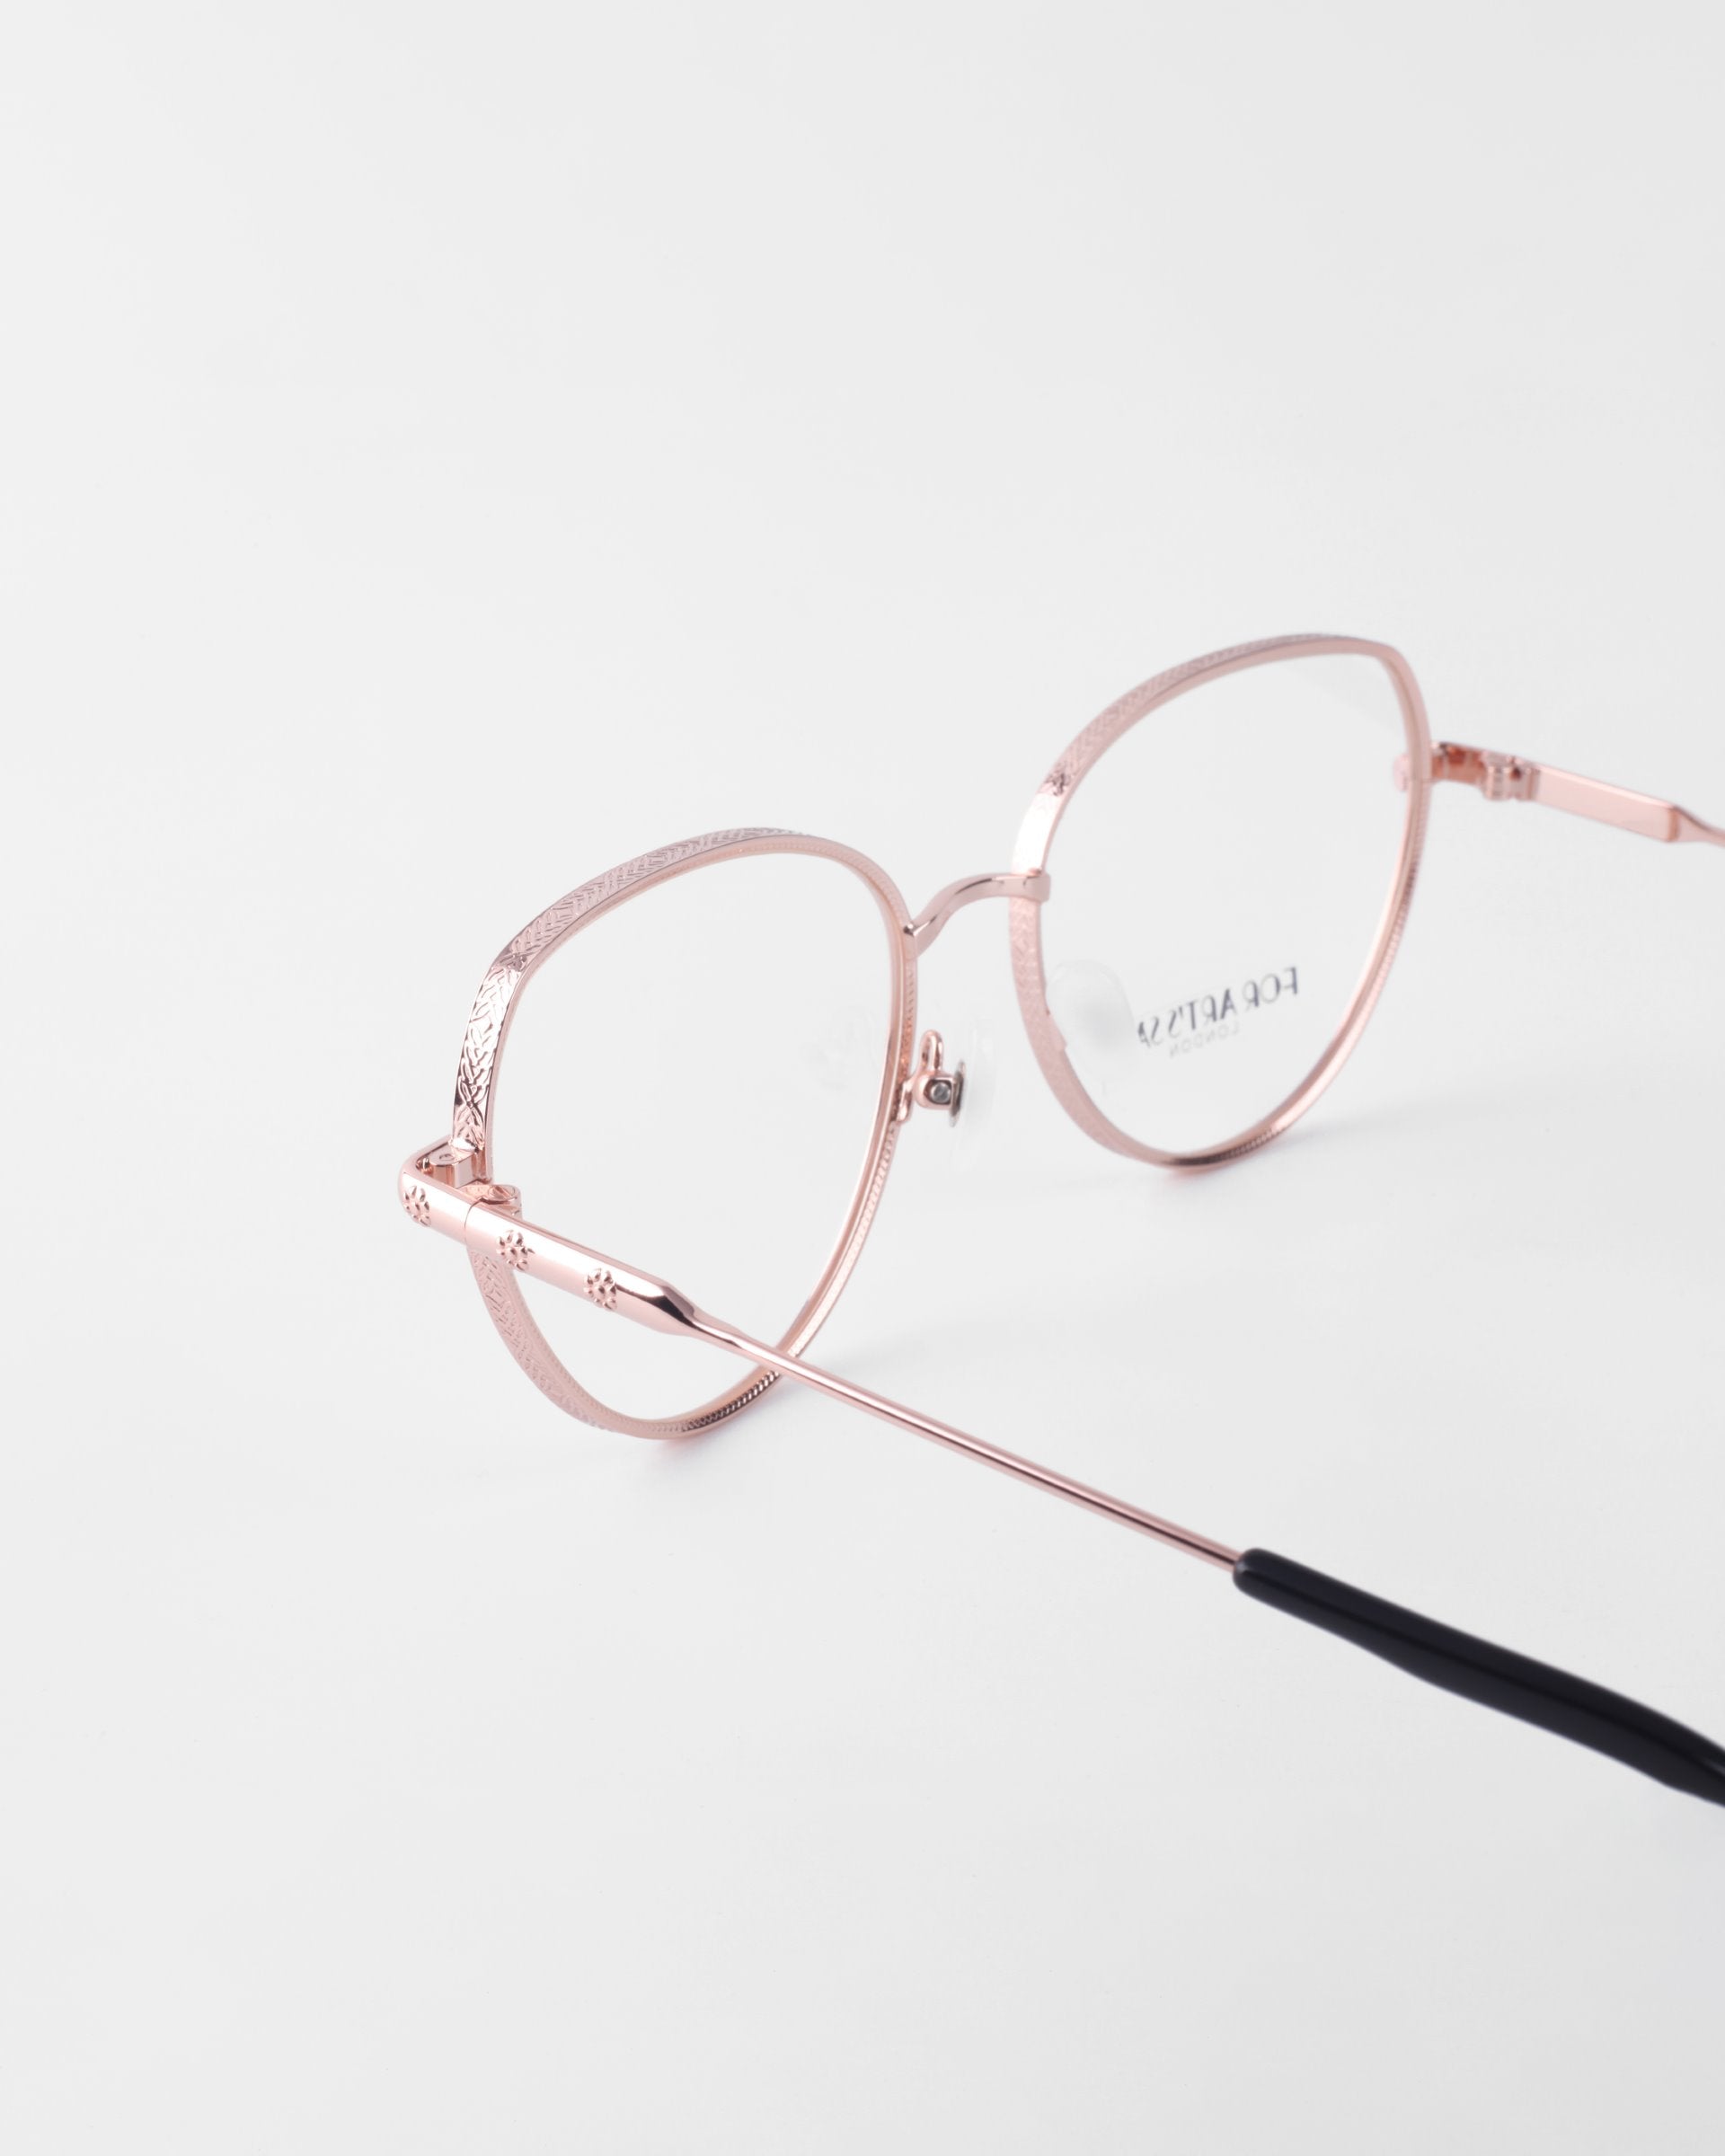 A pair of rose gold wireframe eyeglasses with a rounded shape and thin temples featuring black tips. The 18-karat gold-plated frames are equipped with prescription lenses, enhancing the minimalist and elegant design against a white background. For Art’s Sake®&#39;s Frida Floral eyeglasses effortlessly combine style and function for a timeless look.